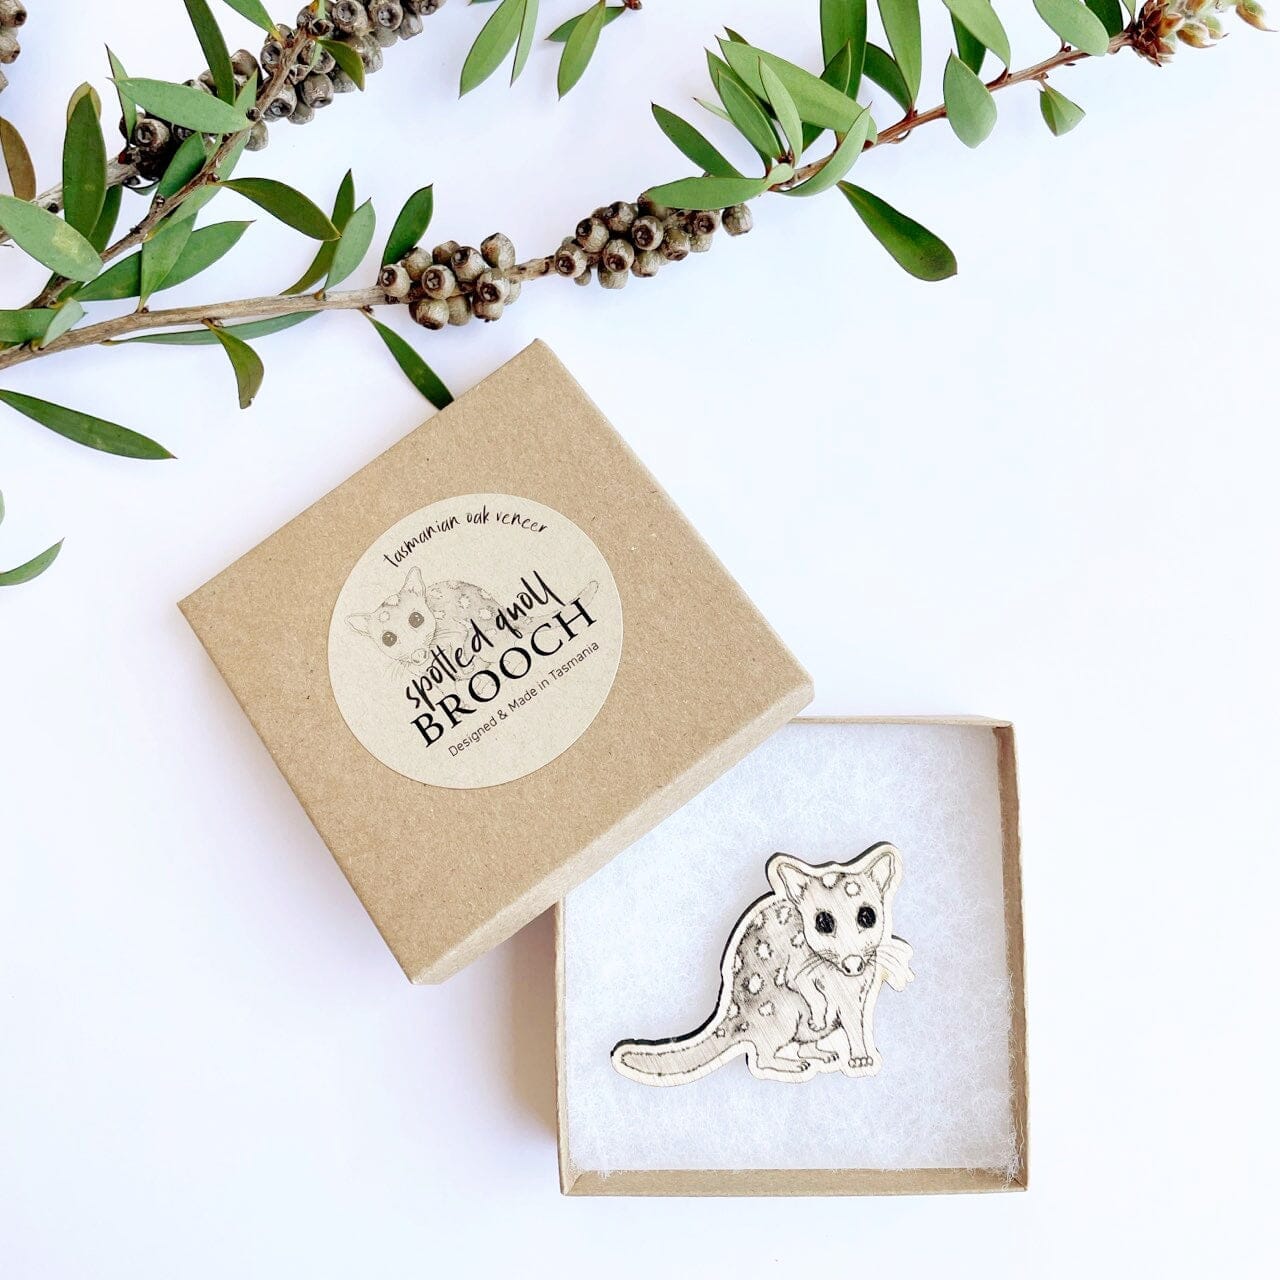 Brooches - Printed Tasmanian Oak Veneer Brooch The Spotted Quoll Spotted Quoll 